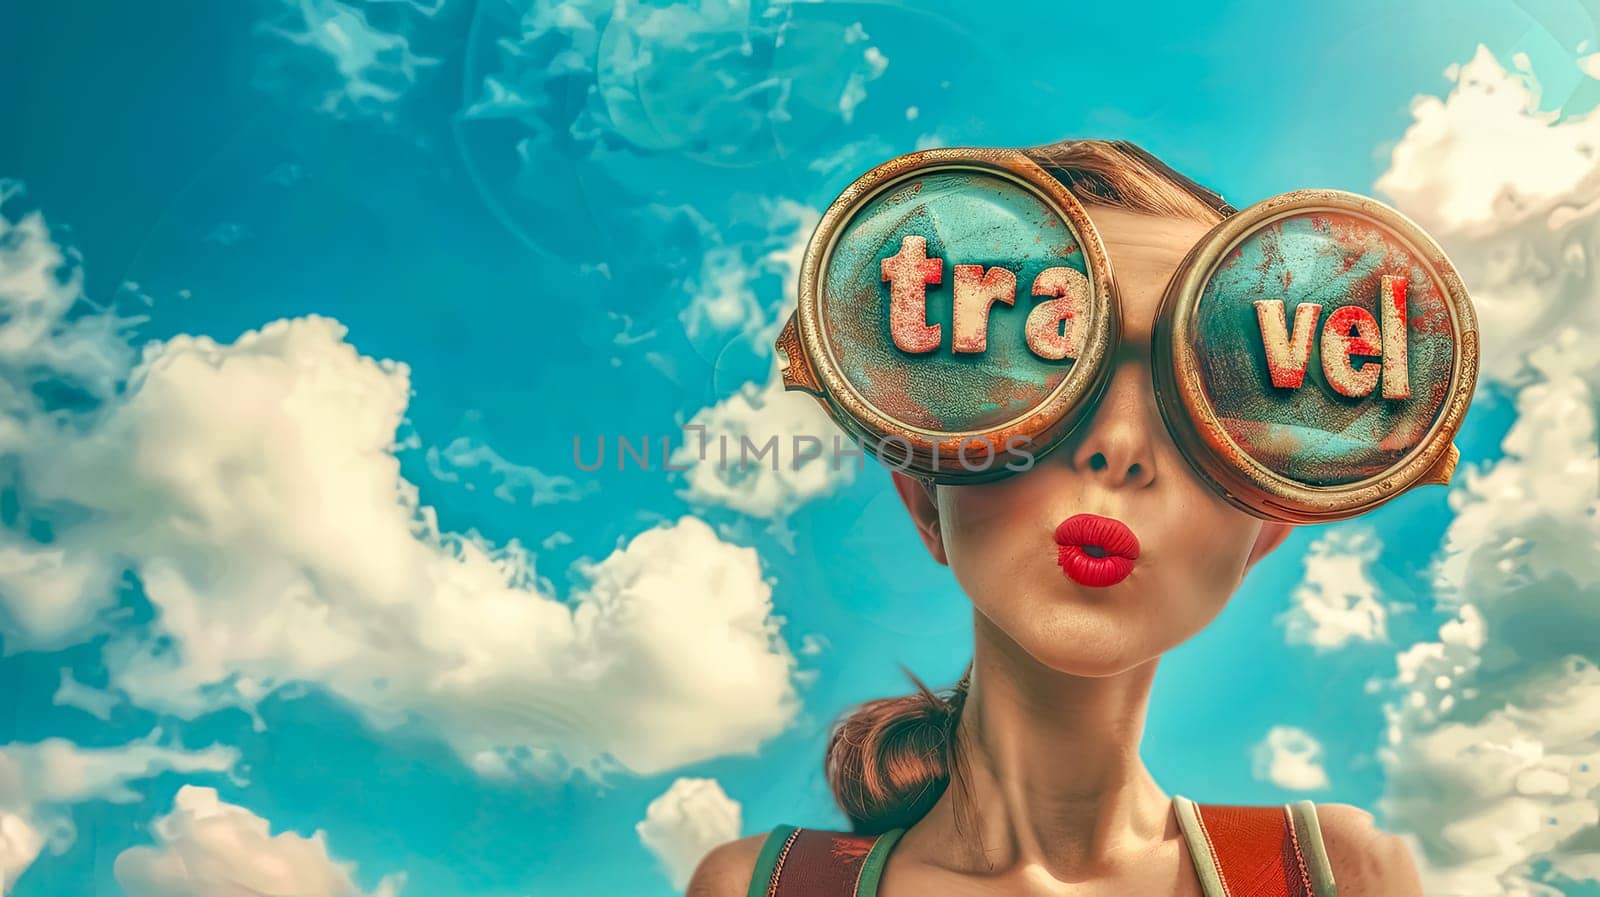 Young woman with binoculars showing 'travel' against a dreamy sky backdrop